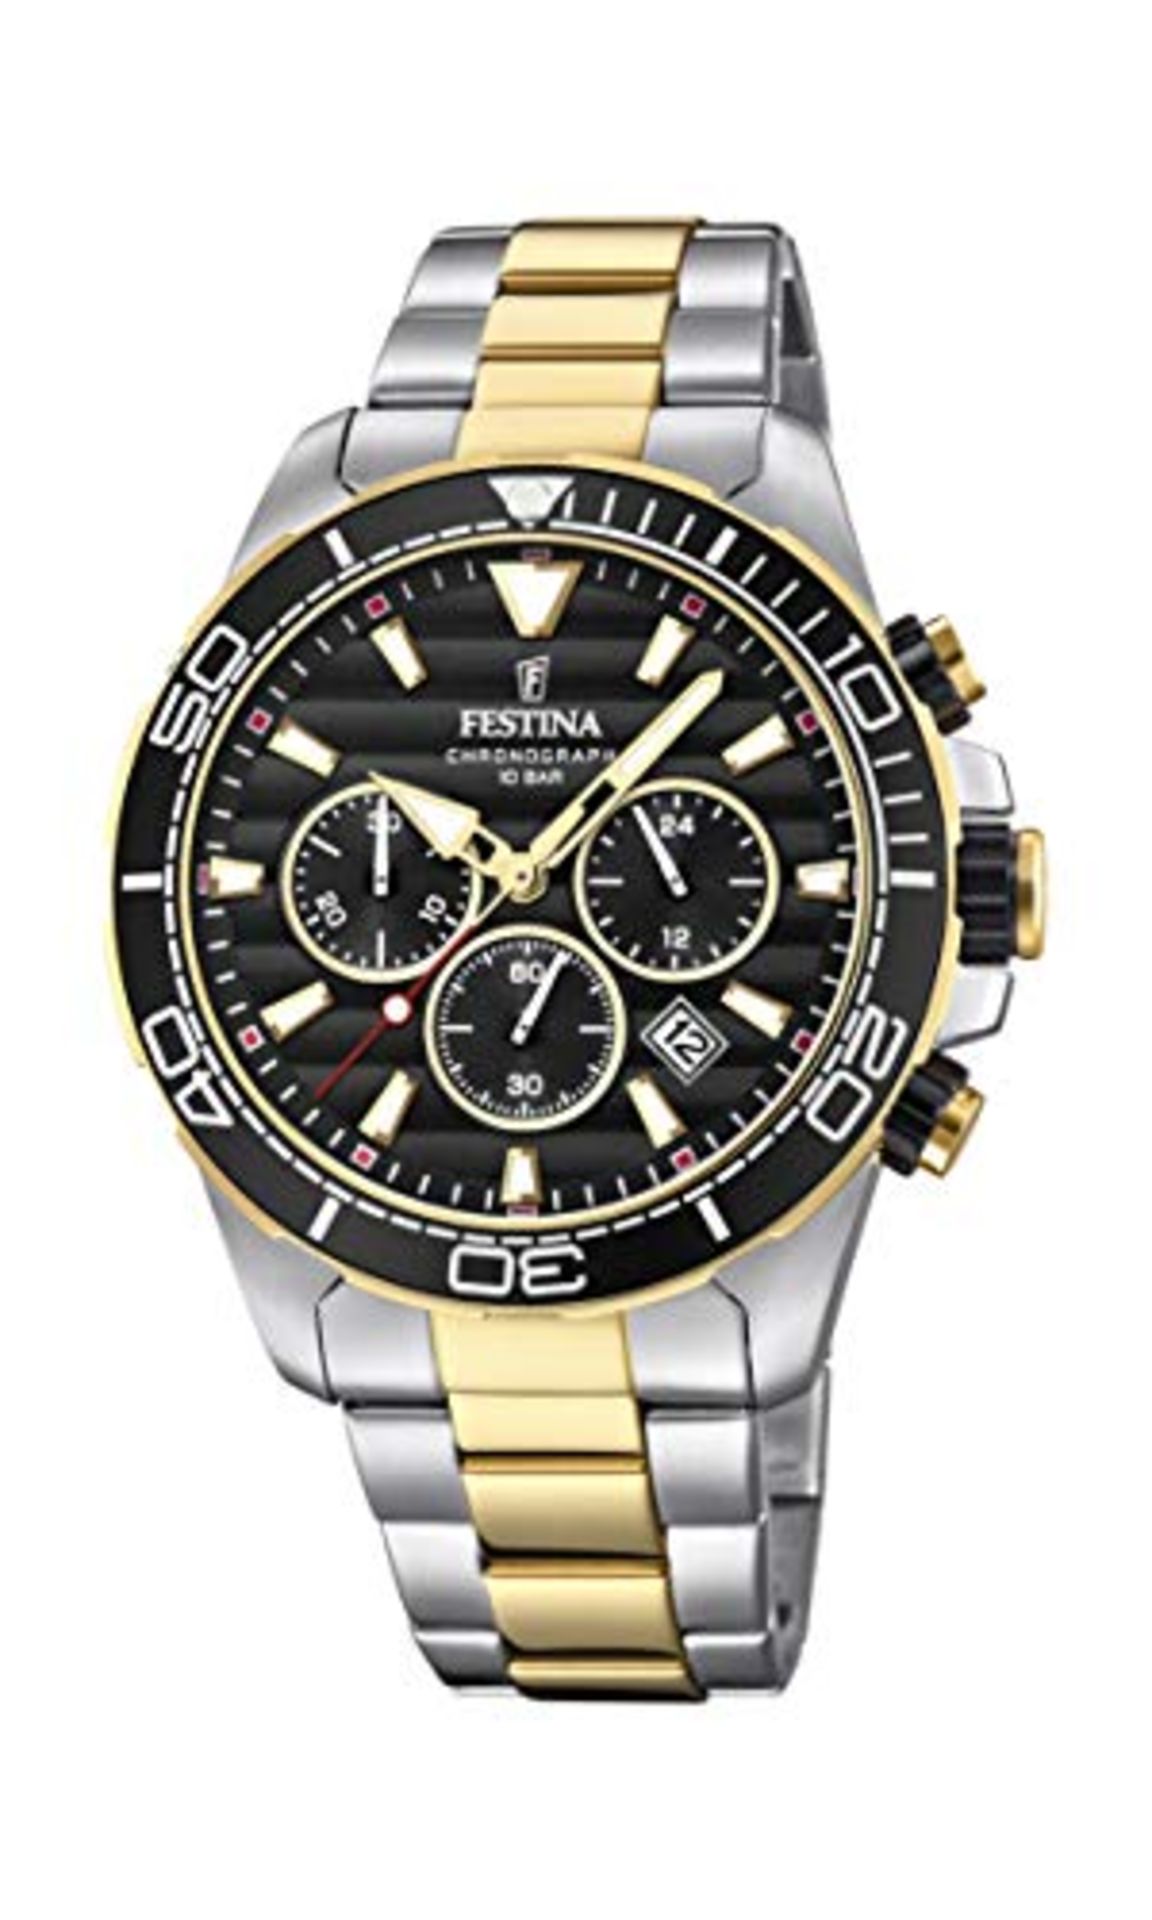 RRP £201.00 FESTINA Men's Quartz Chronograph Watch with Stainless Steel Strap F20363/3